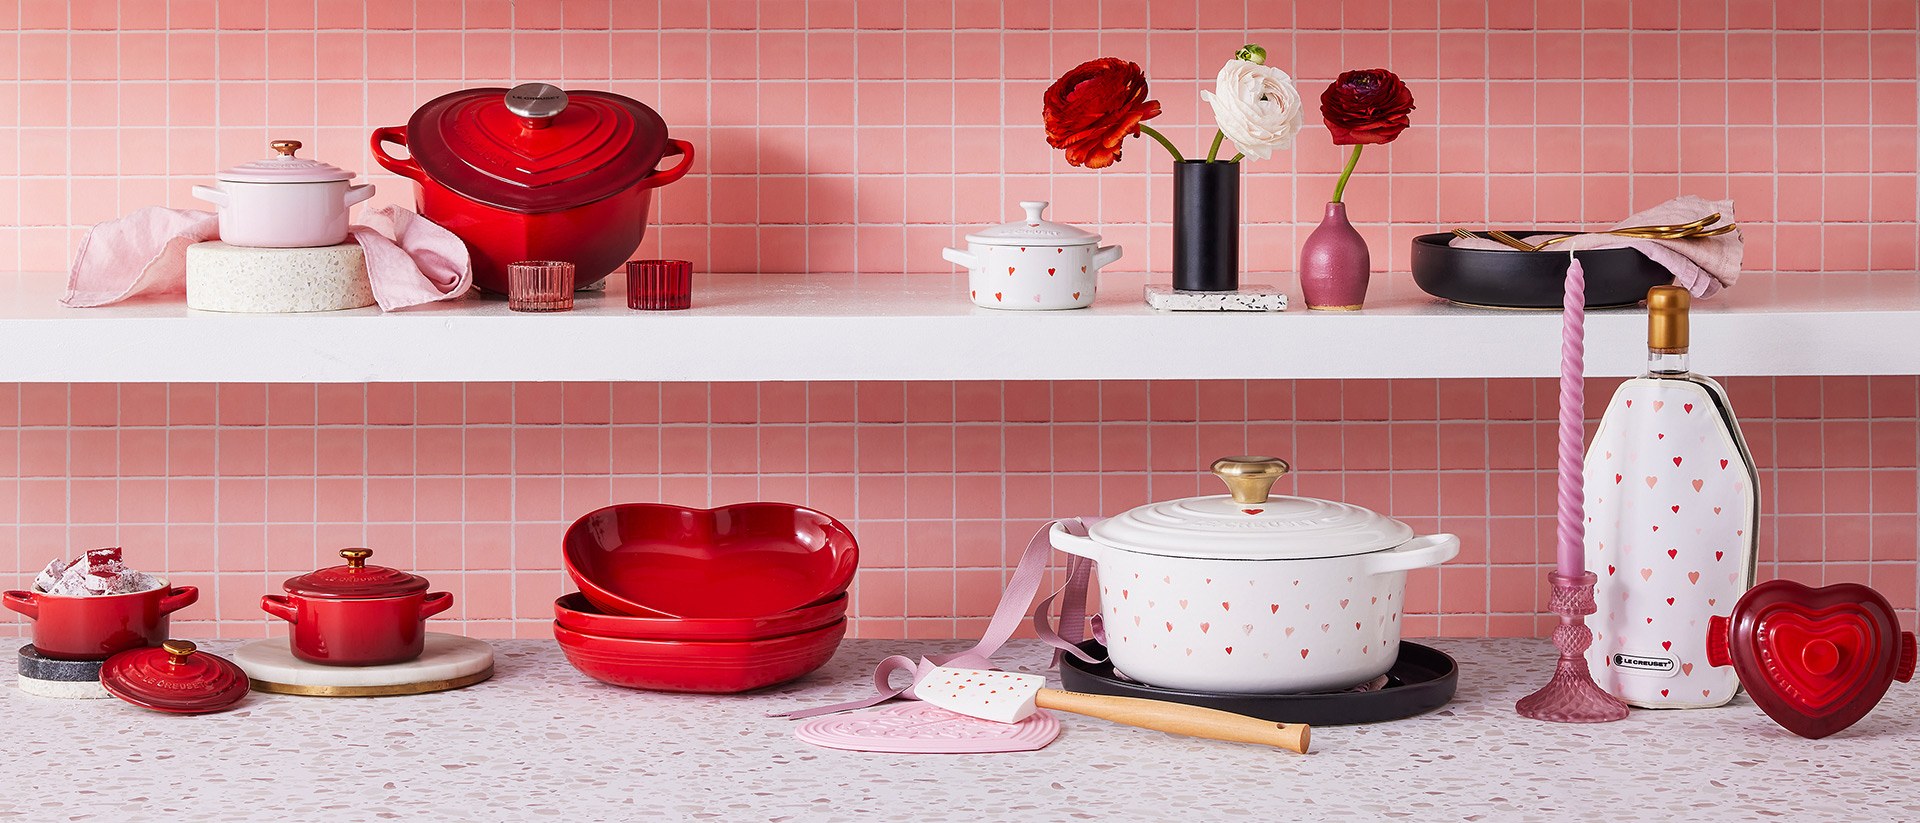 https://www.lecreuset.co.uk/on/demandware.static/-/Library-Sites-lc-sharedLibrary/default/dw0687f50f/images/2023/H1/Campaign/2023_H1_HeartCollection/2023_H1_HeartsCollection_1920x823_1.jpg